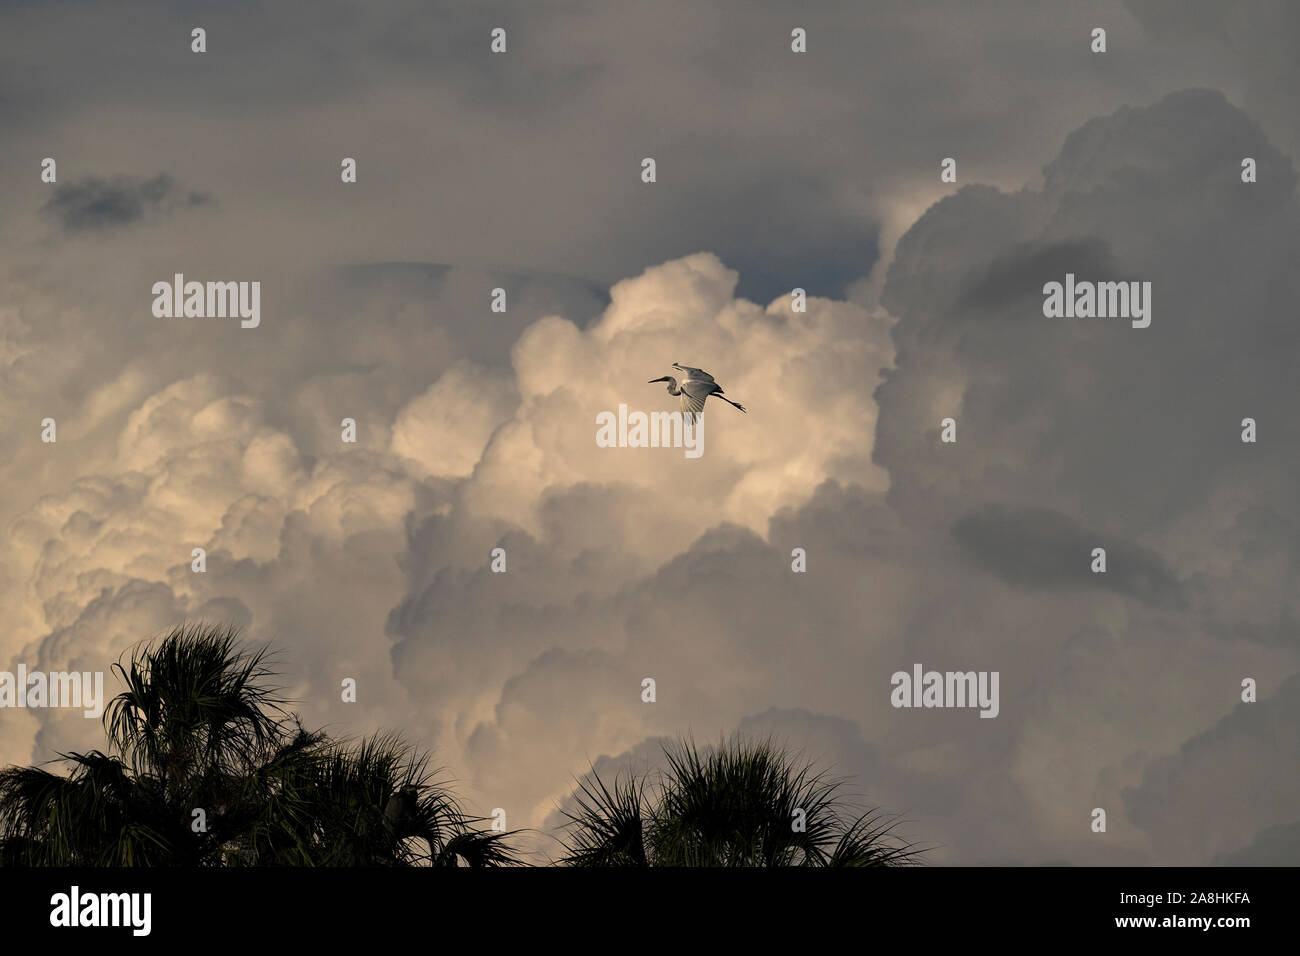 White Heron soaring in a cloudy sky over palm trees with a sun reflection on the clouds. Stock Photo